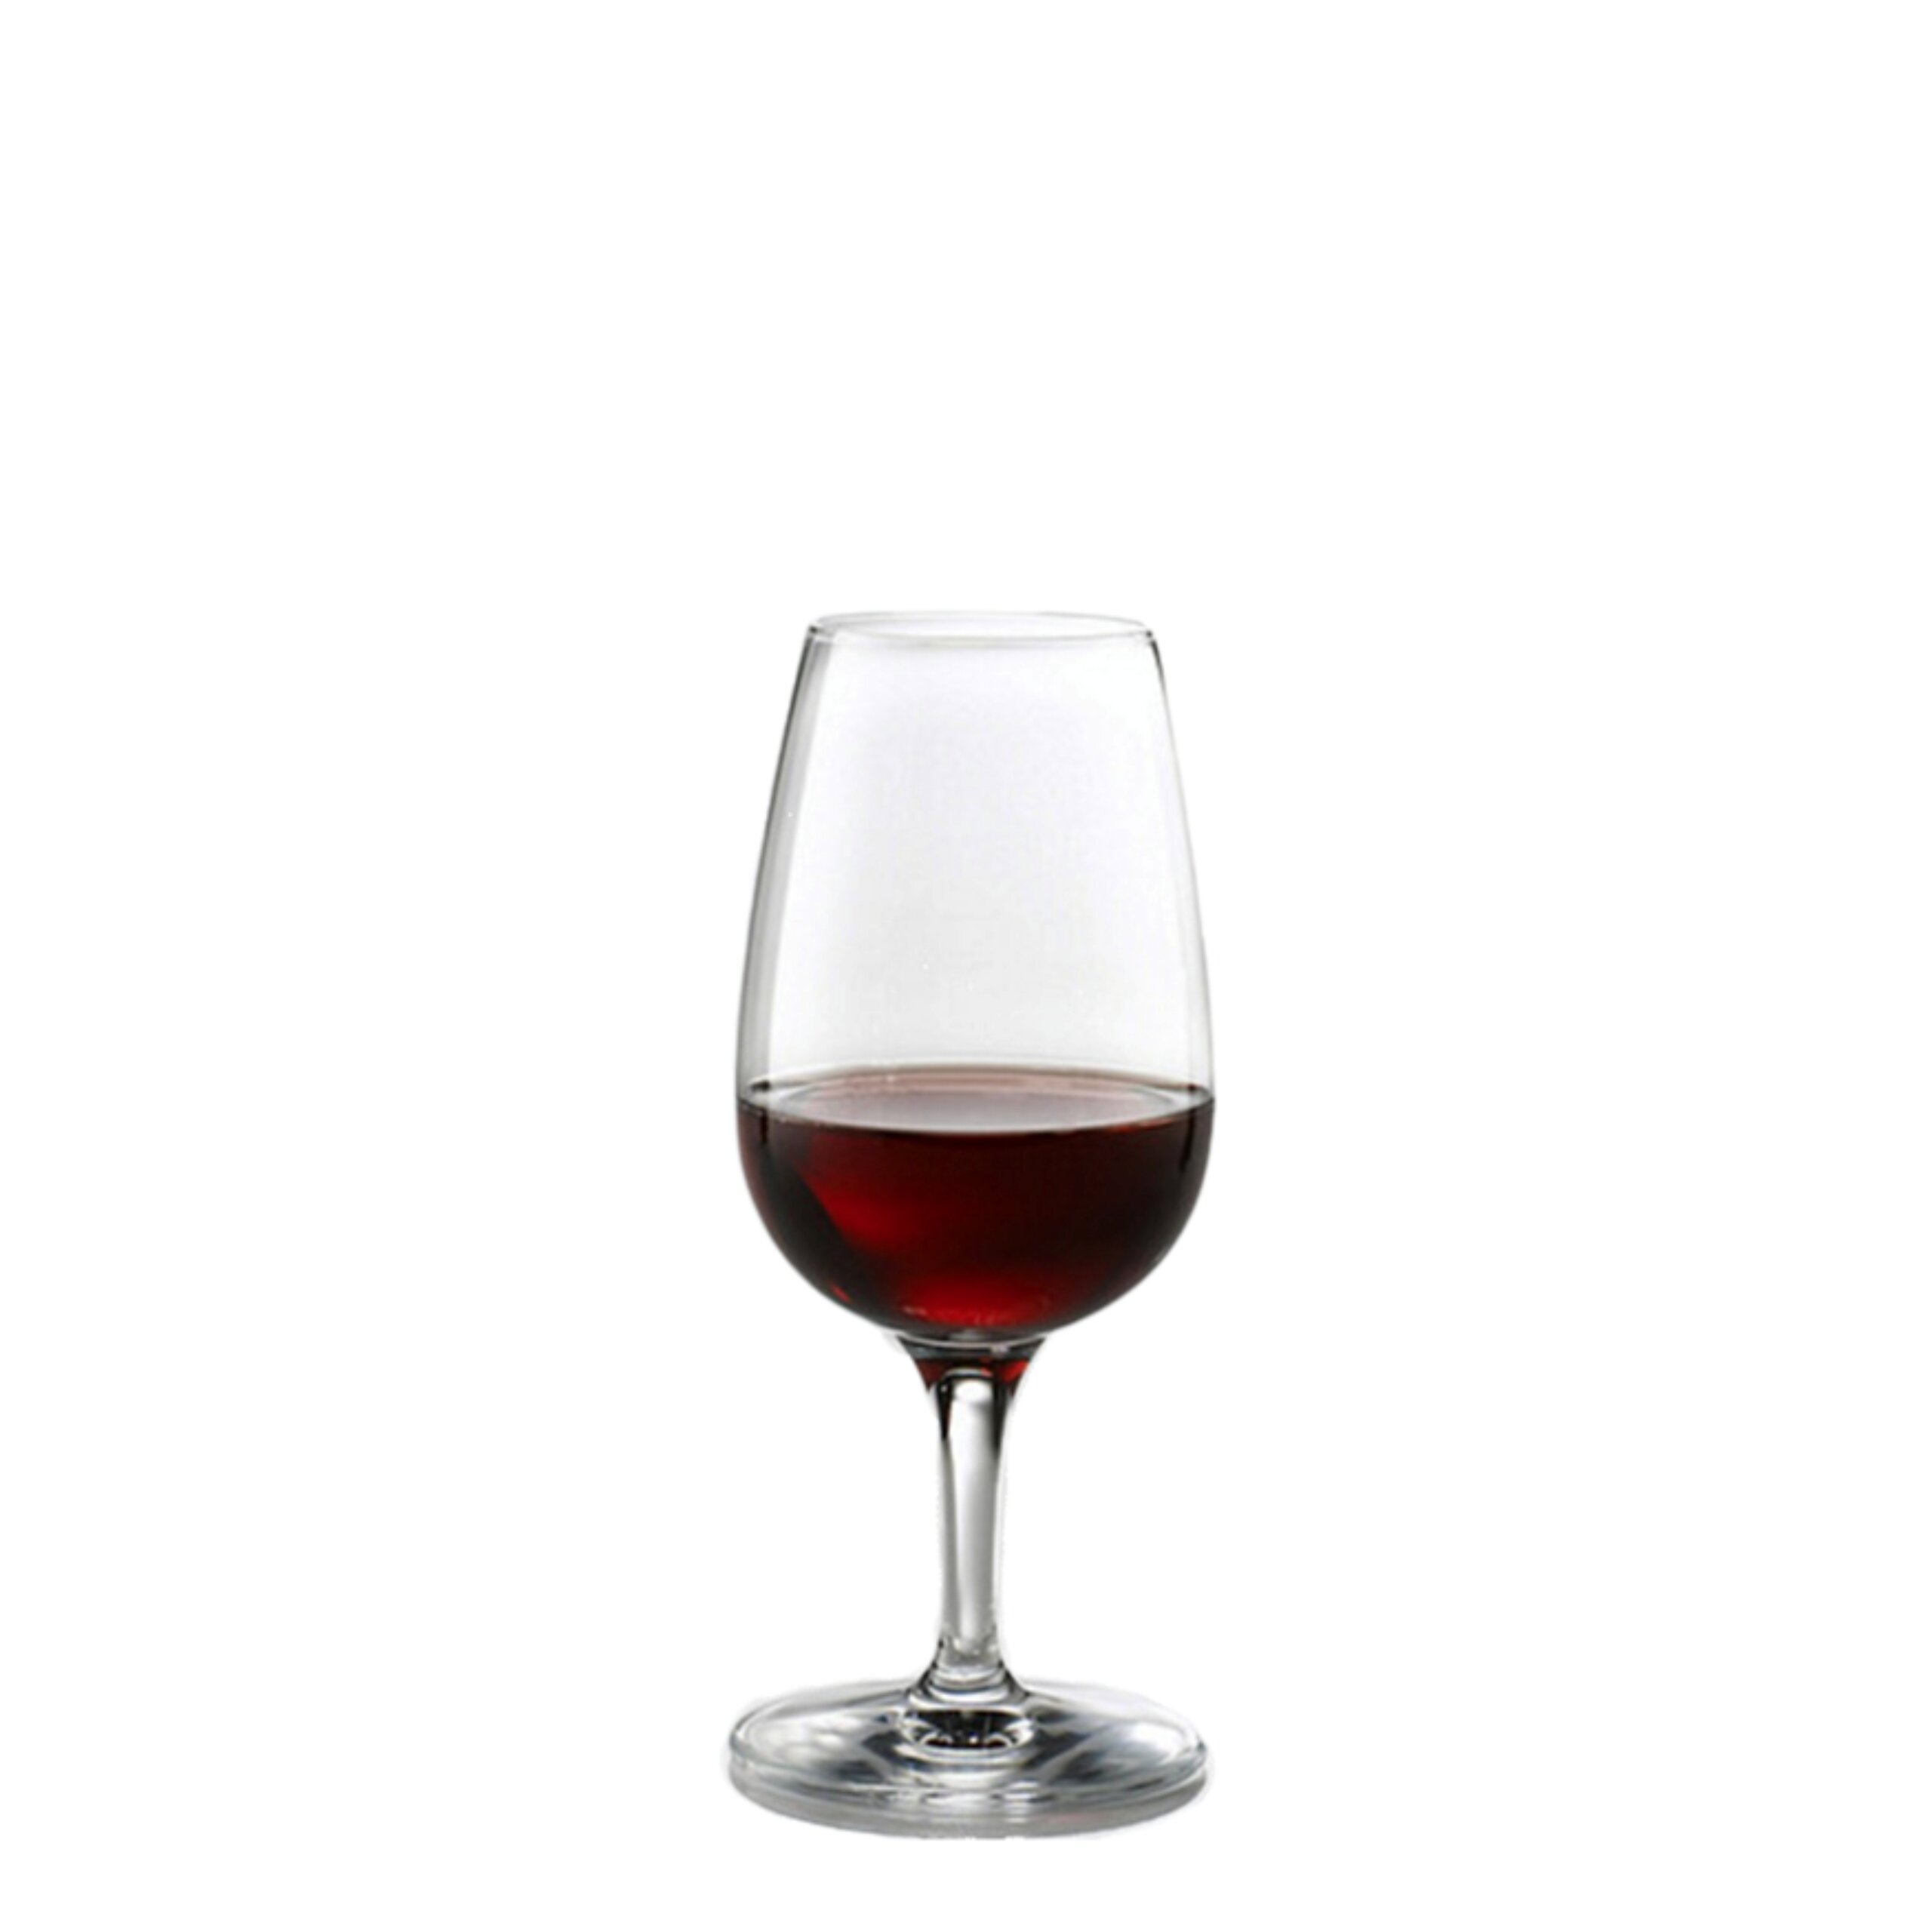 INAO/ISO 7 oz. Crystal Wine Tasting Glass, Set of 12 